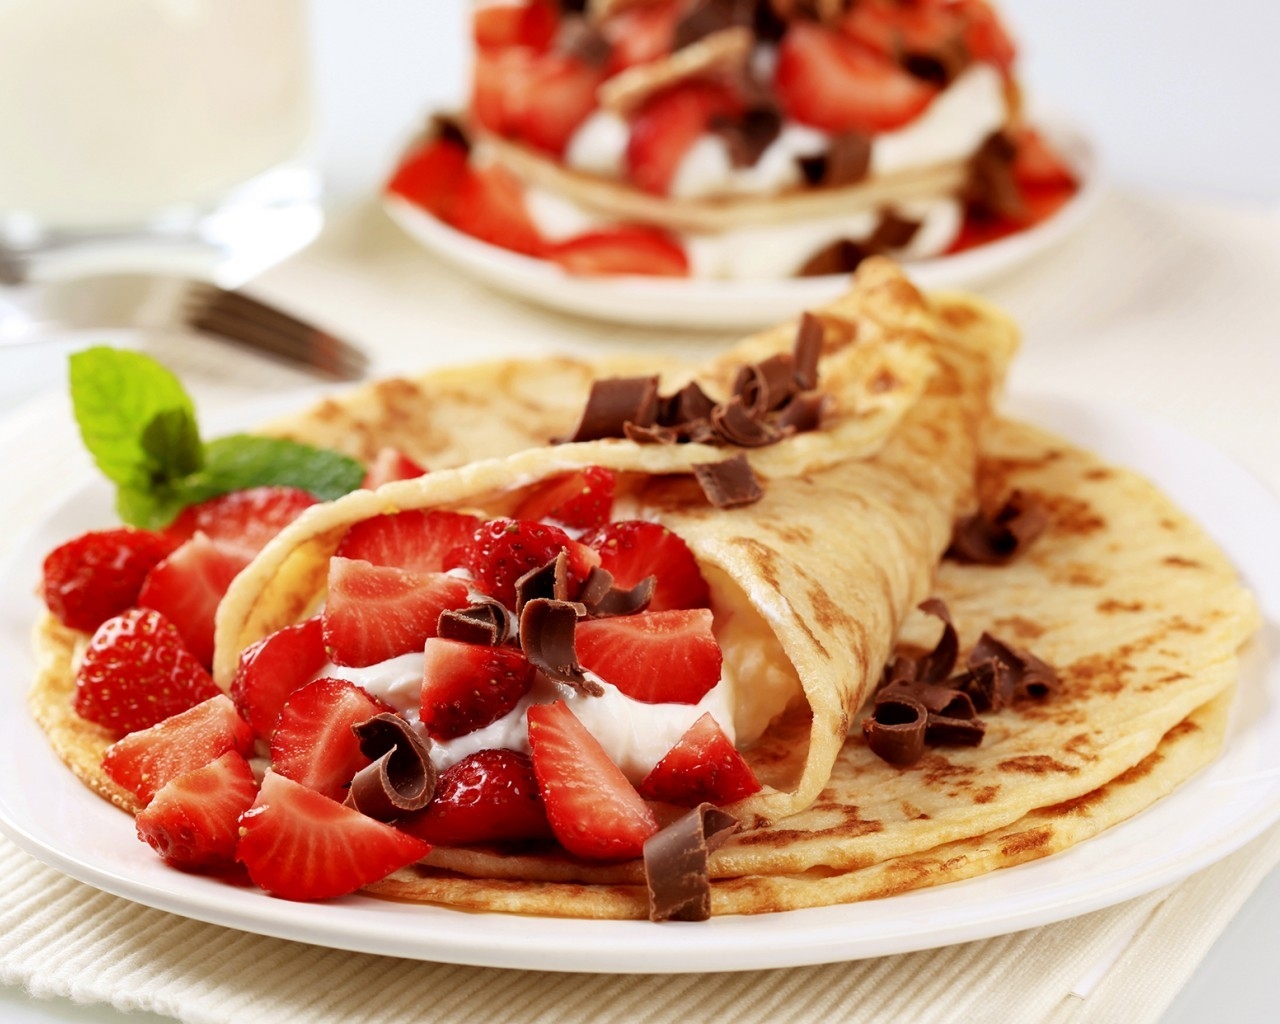 Strawberry Pancakes for 1280 x 1024 resolution